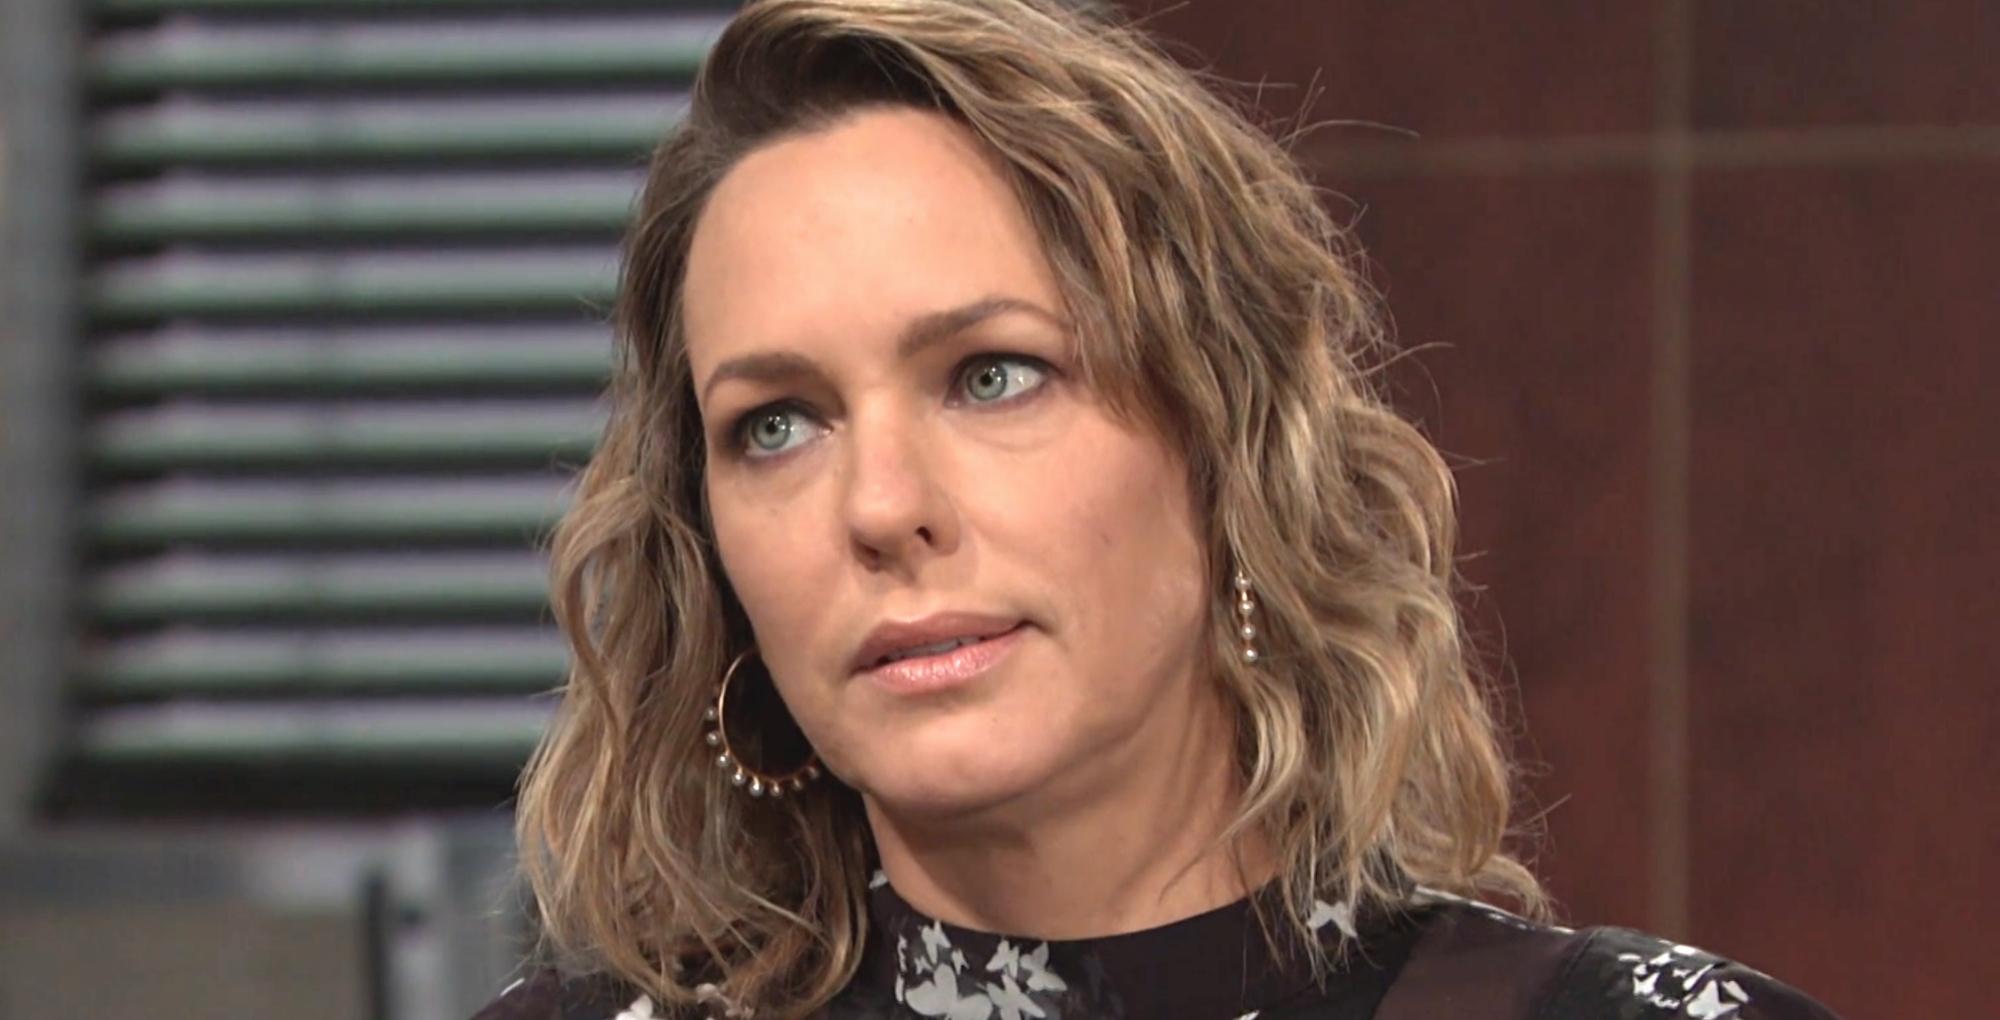 days of our lives spoilers for june 2, 2023, have nicole looking to be honest.